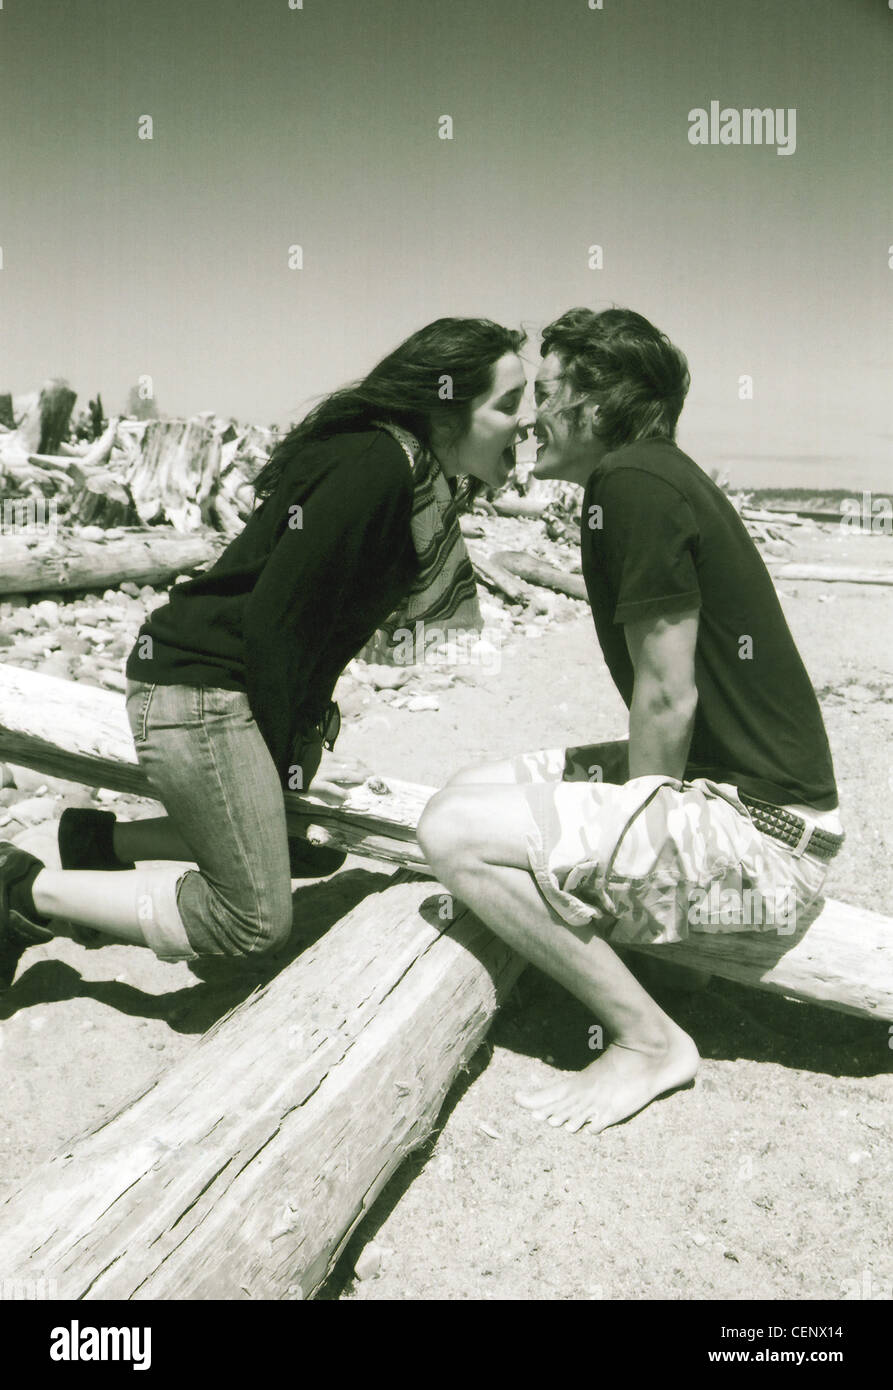 Black and white image of male and female sitting on wooden seesaw on beach leaning towards each other about to kiss Stock Photo